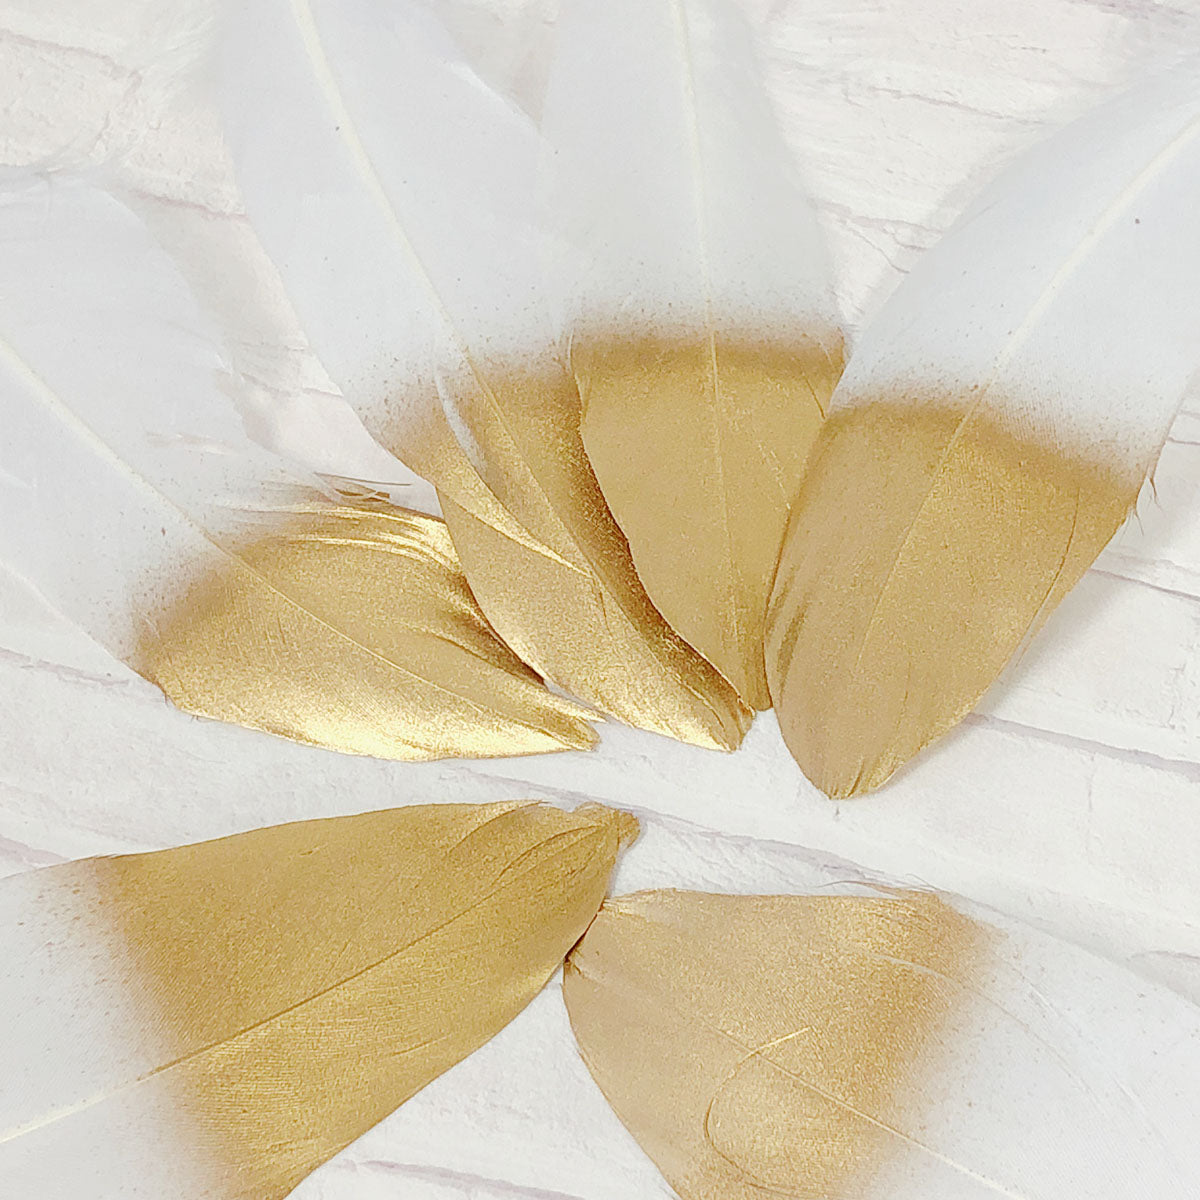 Wrapables A71279c Gold Dipped, Bohemian Decorations for Weddings, Parties, DIY Art Projects, Teal Feathers